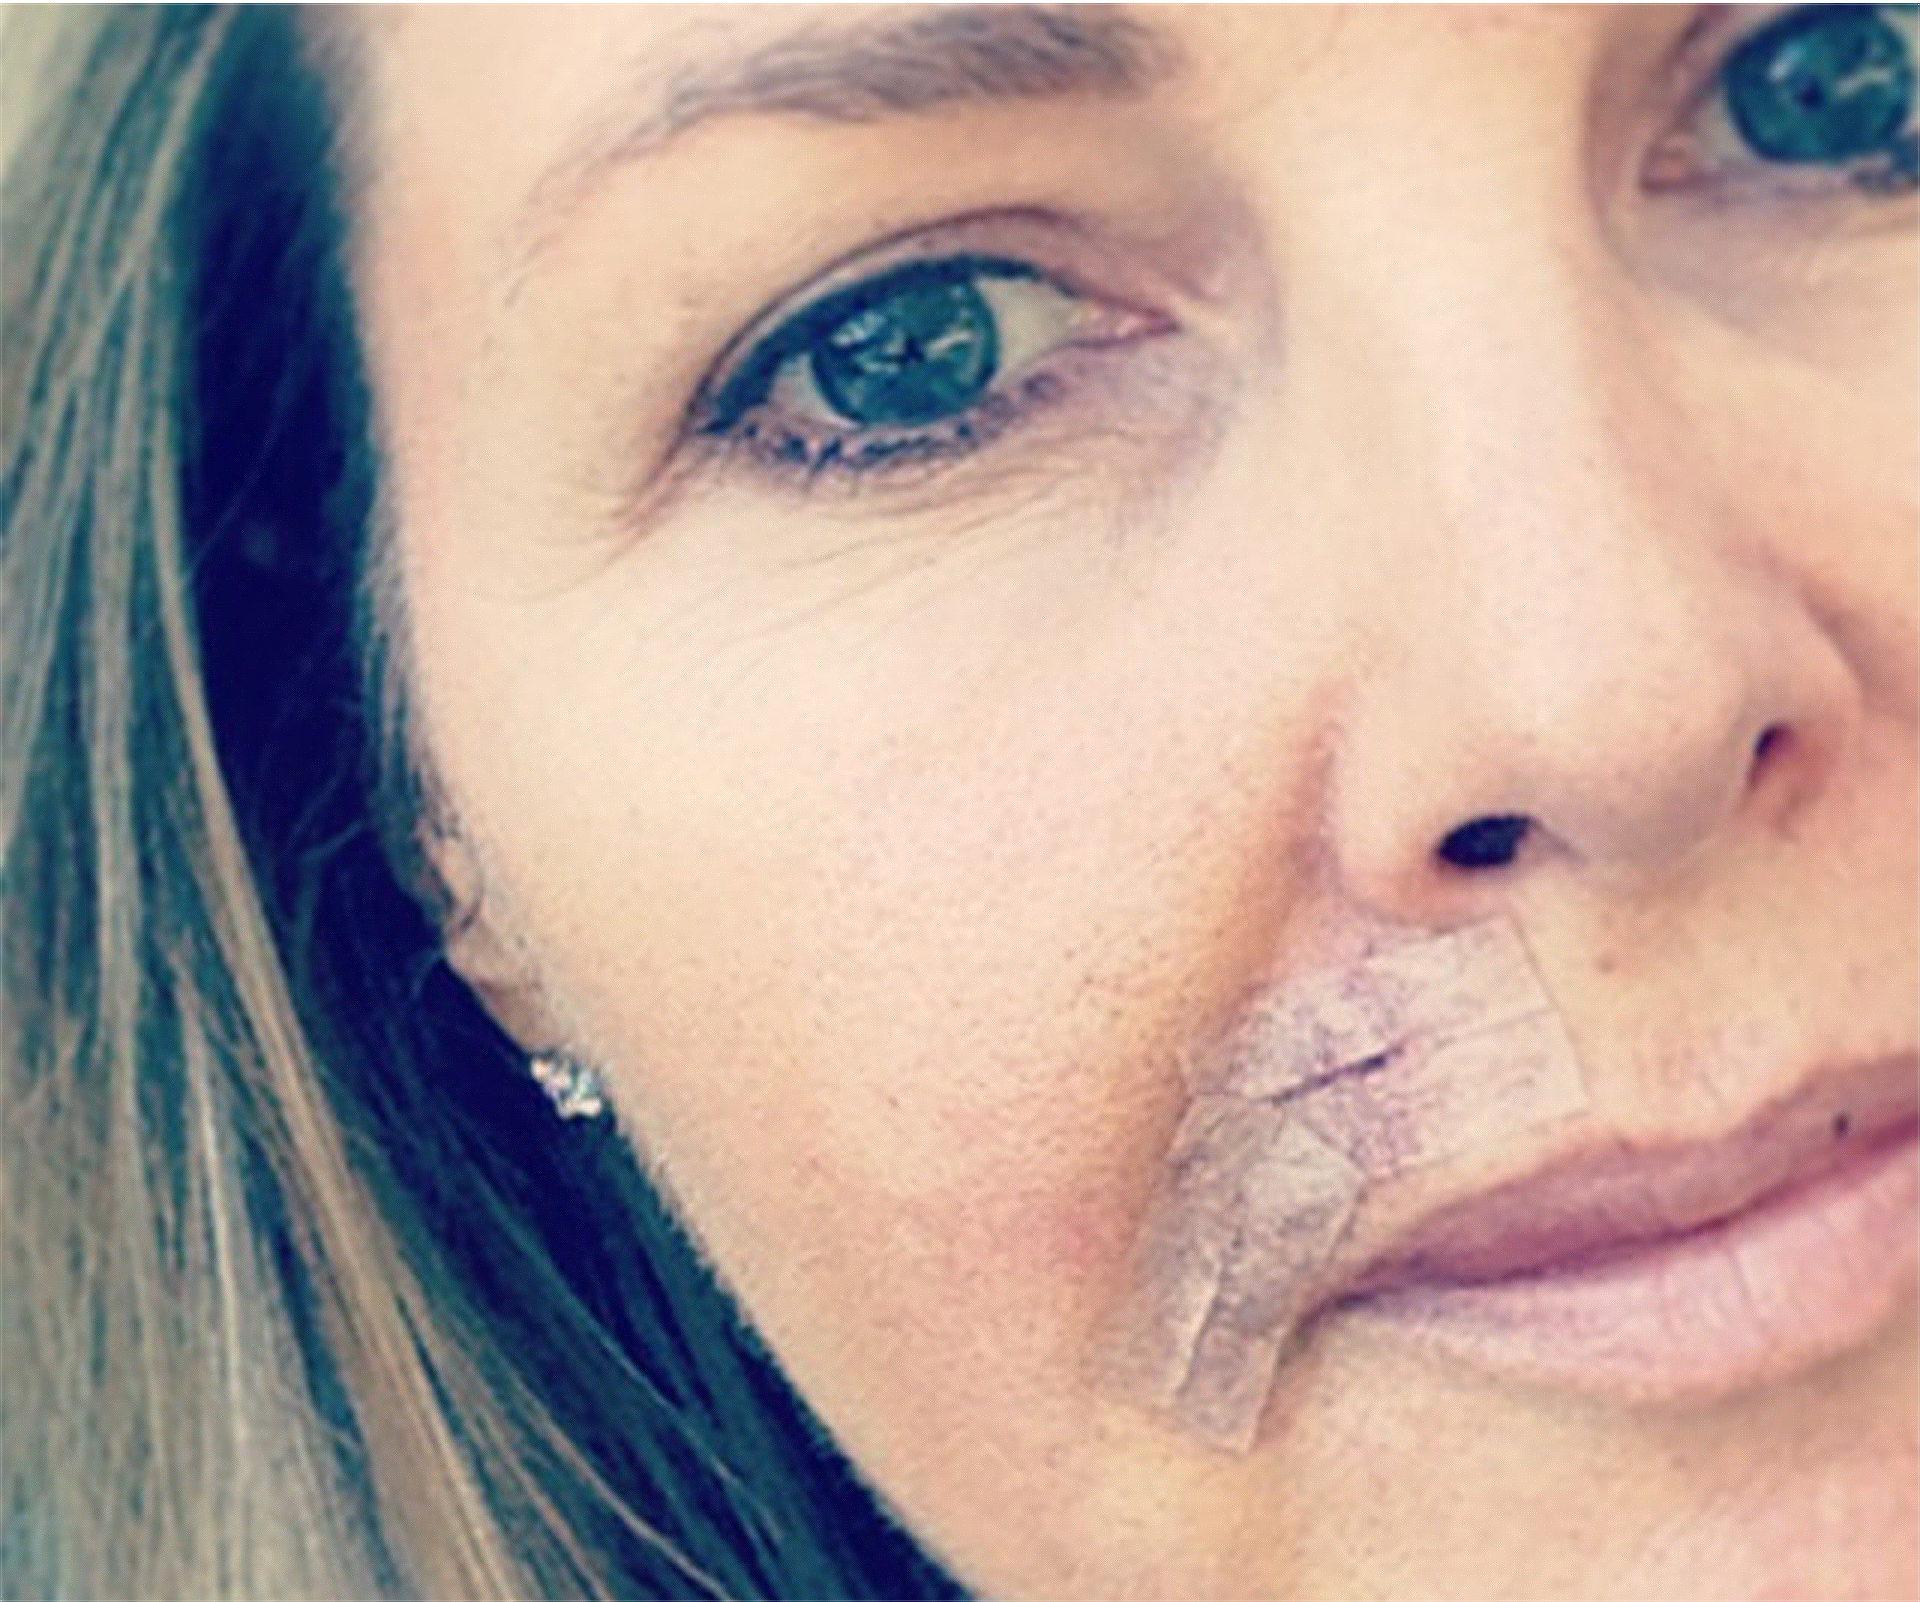 Georgie Gardner: “Please be sun smart and get your skin checked”